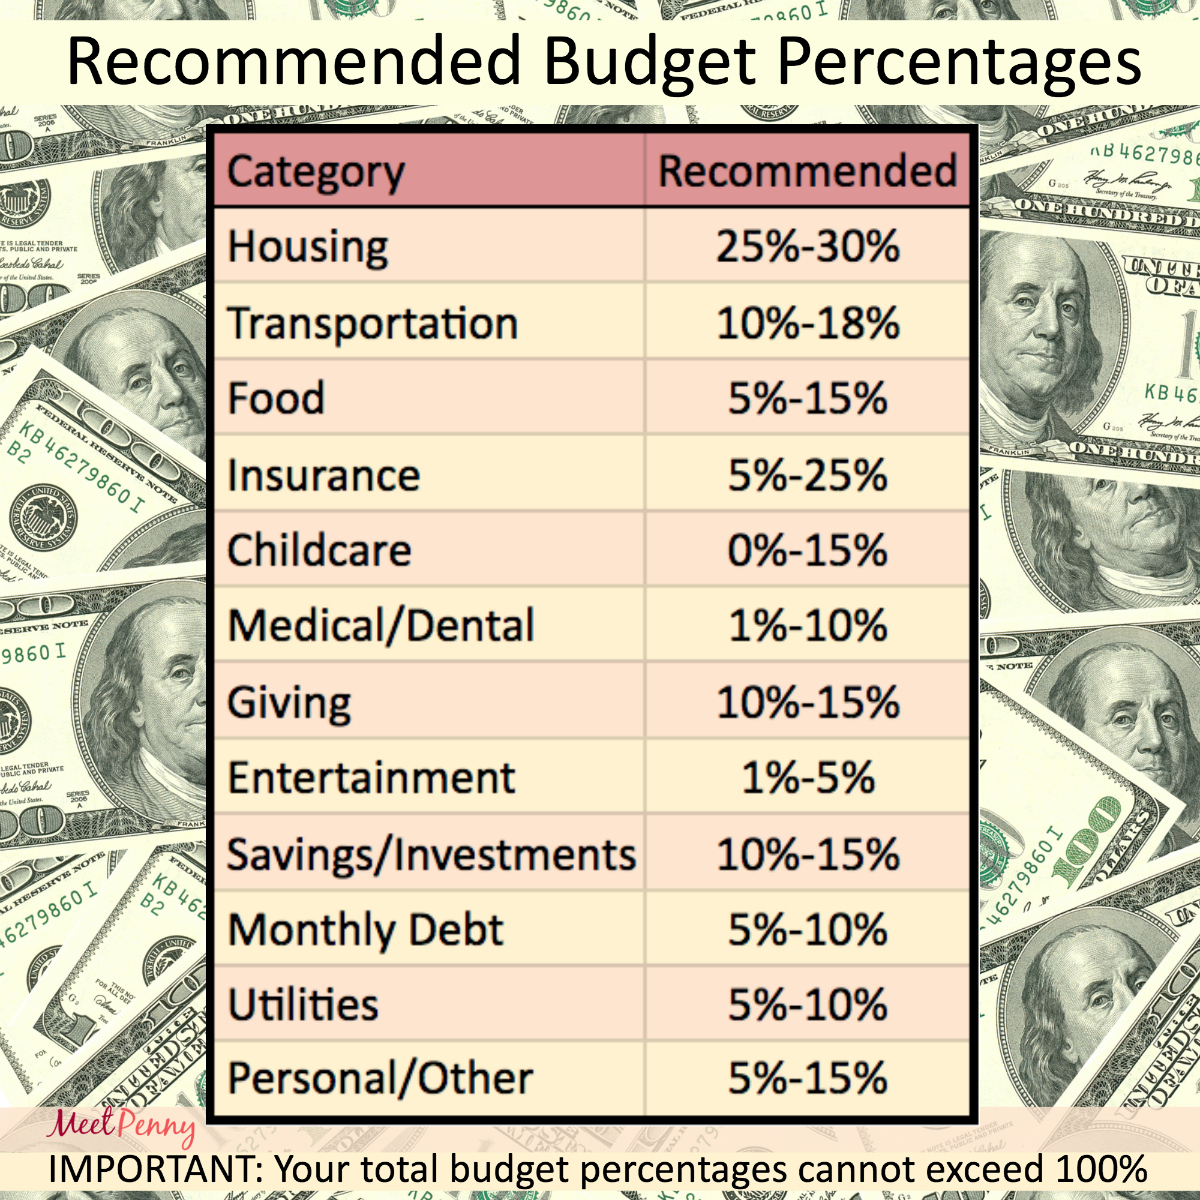 Comprehensive guide to budgeting. Including recommended budget percentages and free excel budget template.